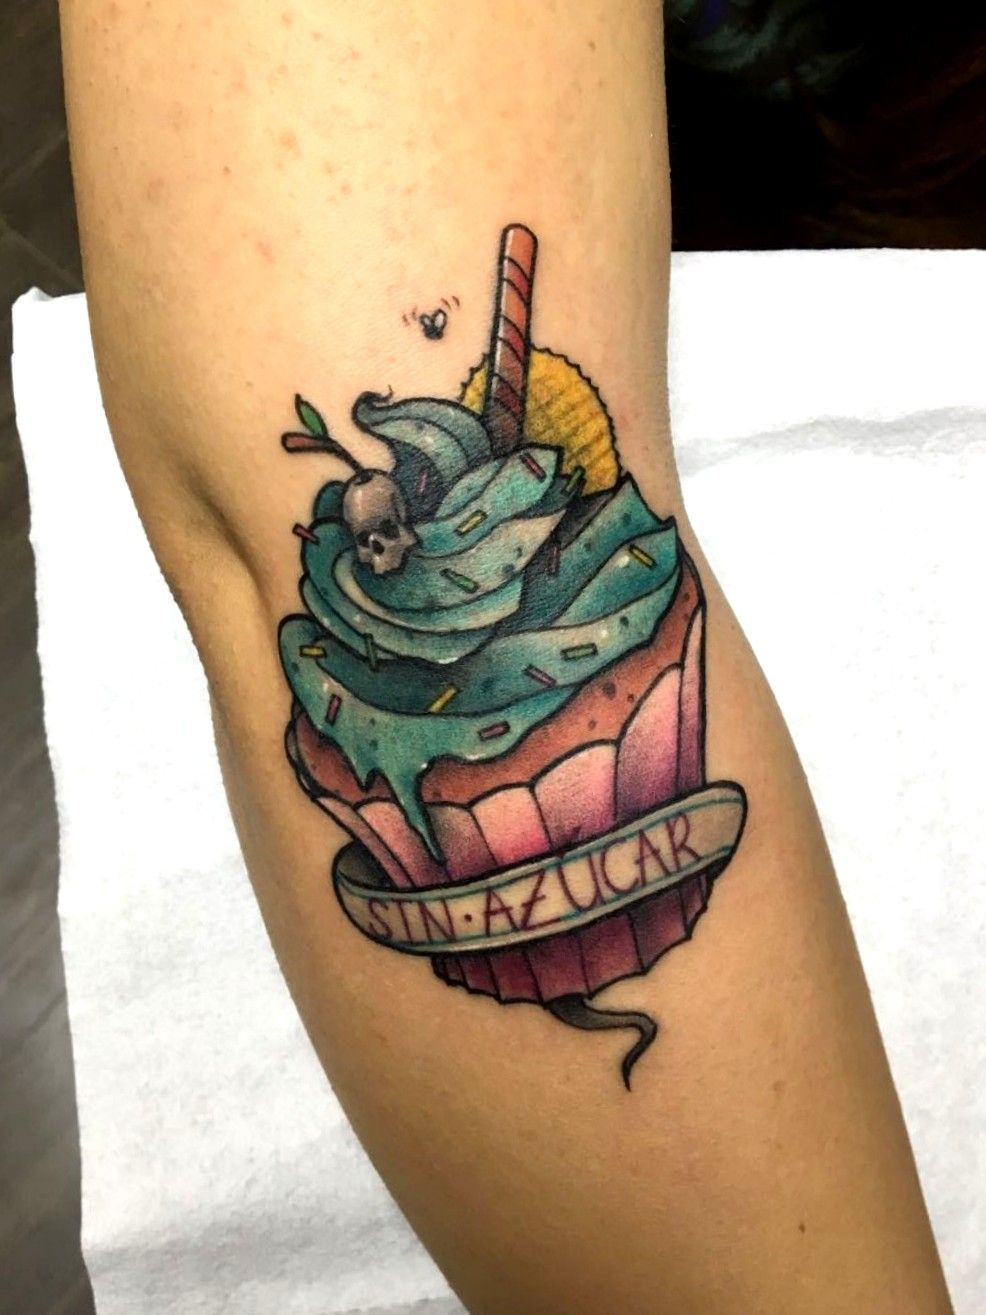 55 Adorable Cupcake Tattoos with Meanings and Ideas  Body Art Guru